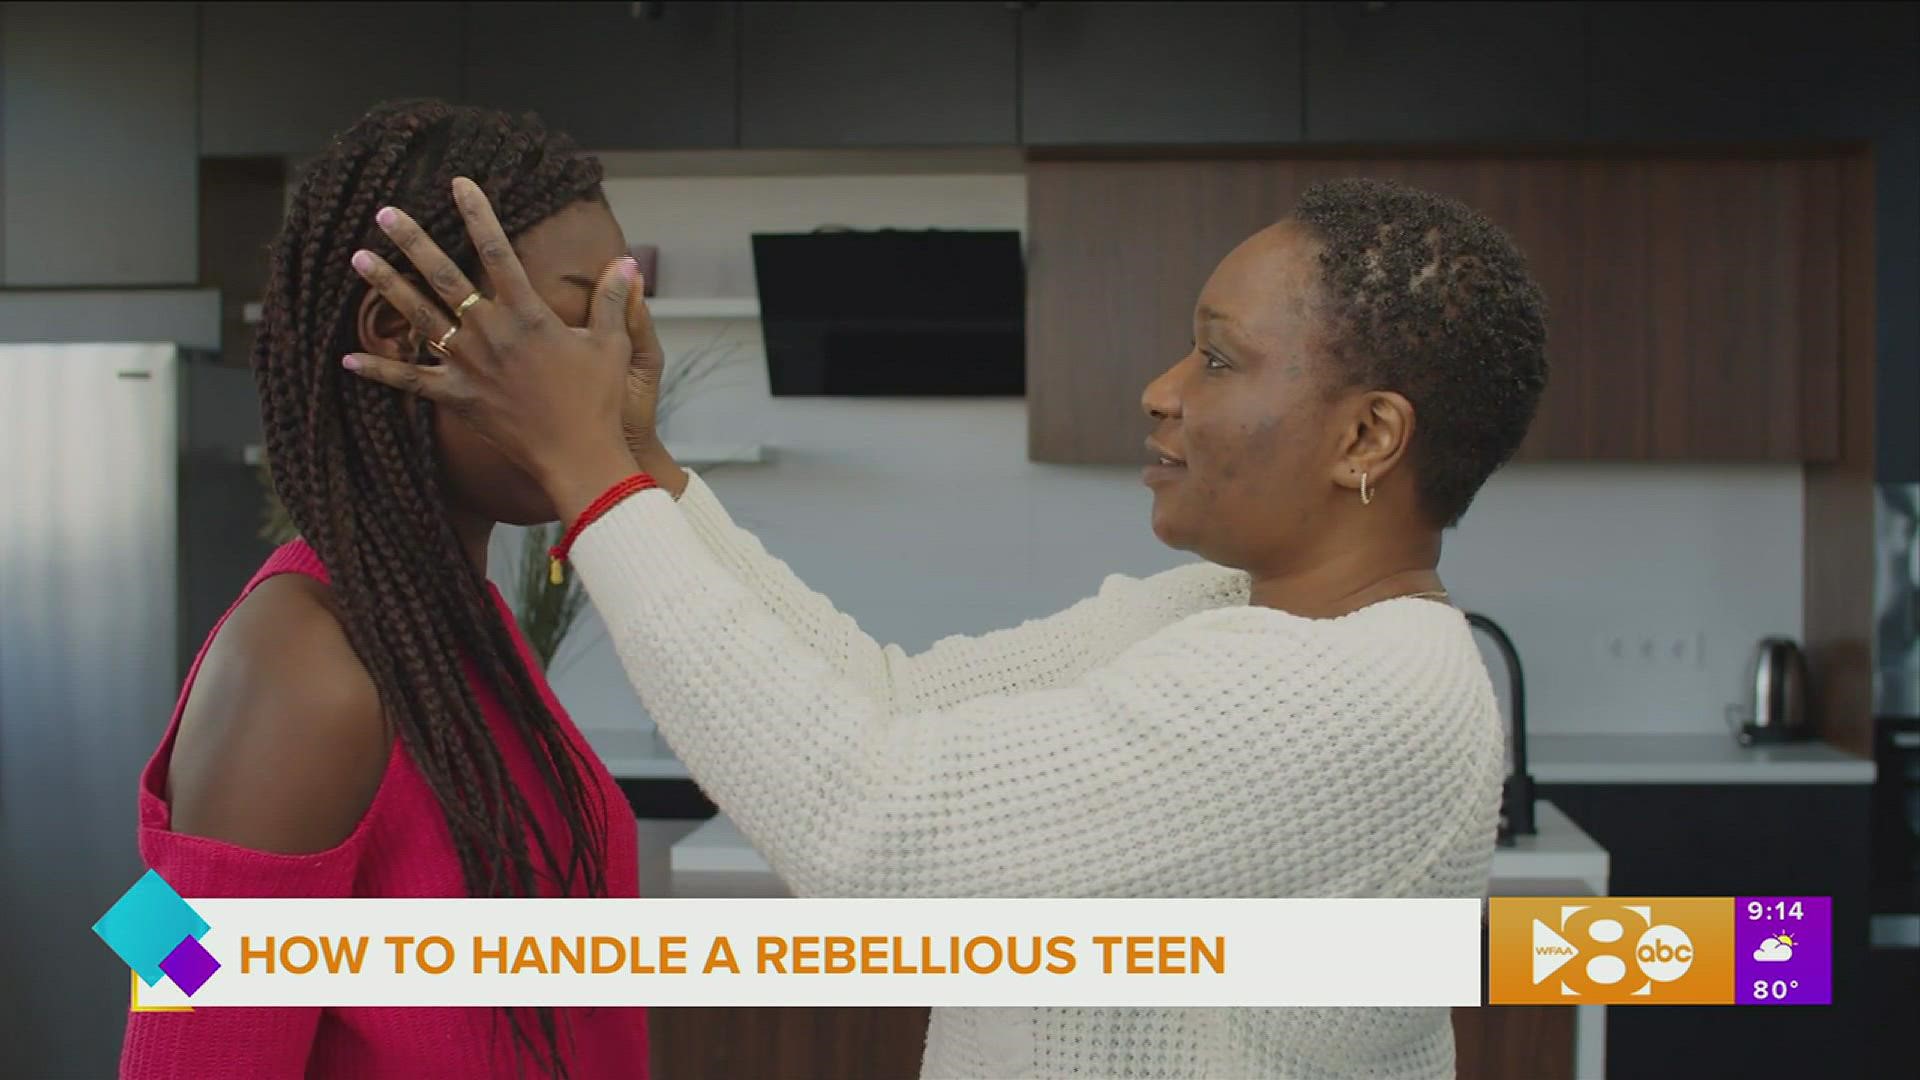 Rebellion is a natural part of being a teenager and growing up, but a teen’s expressions of rebellion can be difficult to deal with.